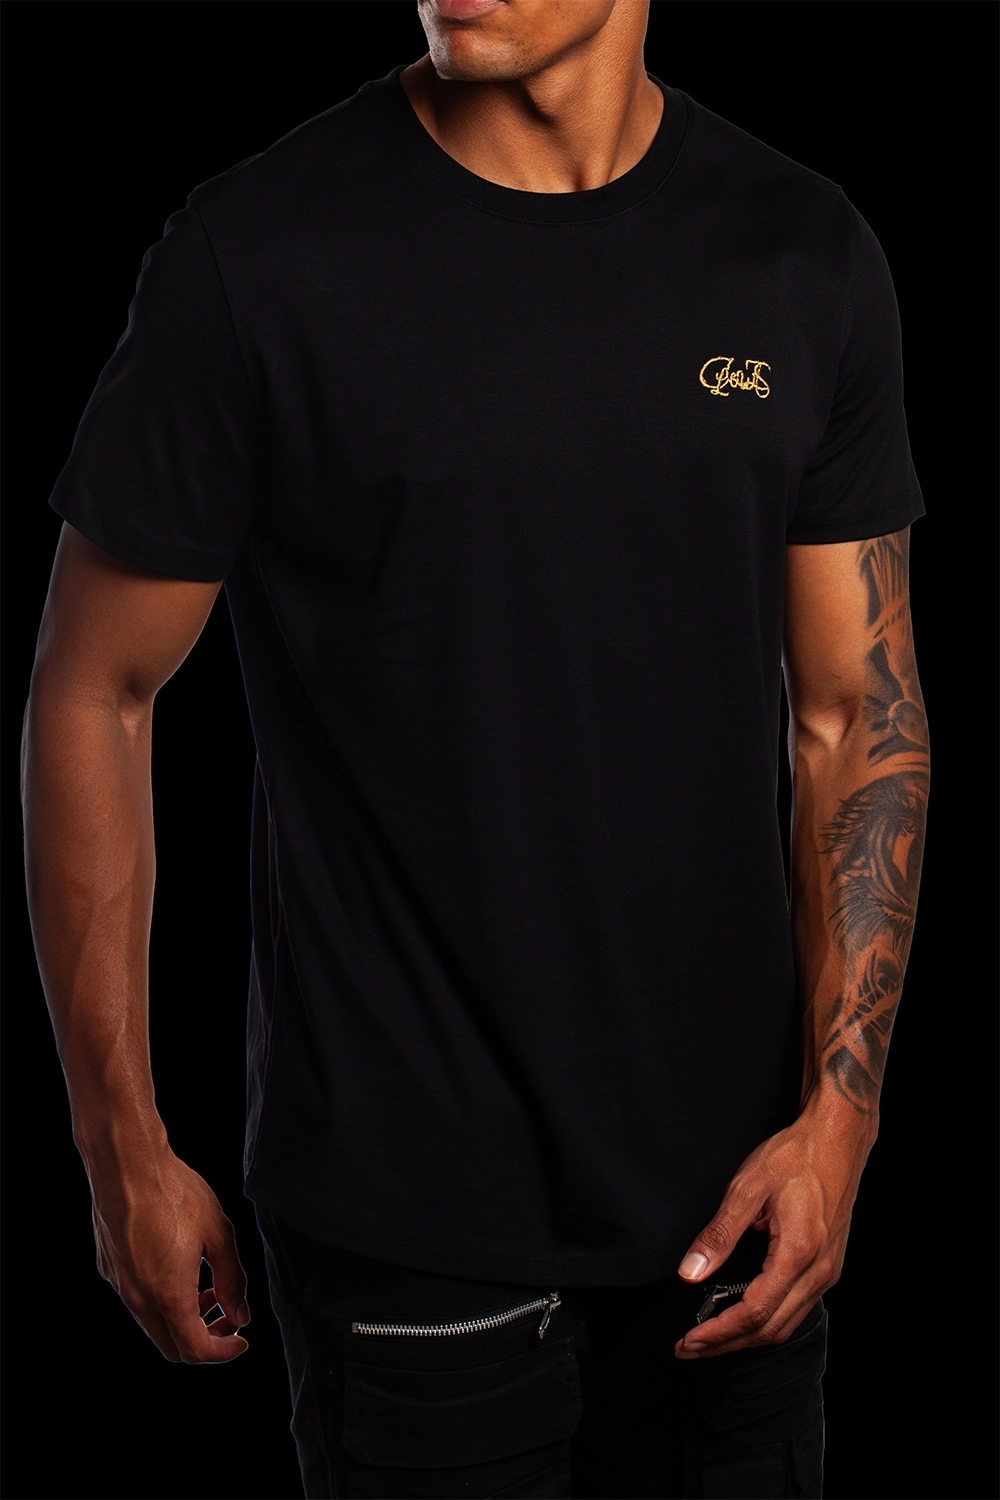 Black T Shirt embroidered with the worlds finest Piana Clerico 24-carat gold thread- made exclusively in Italy designed in Ireland